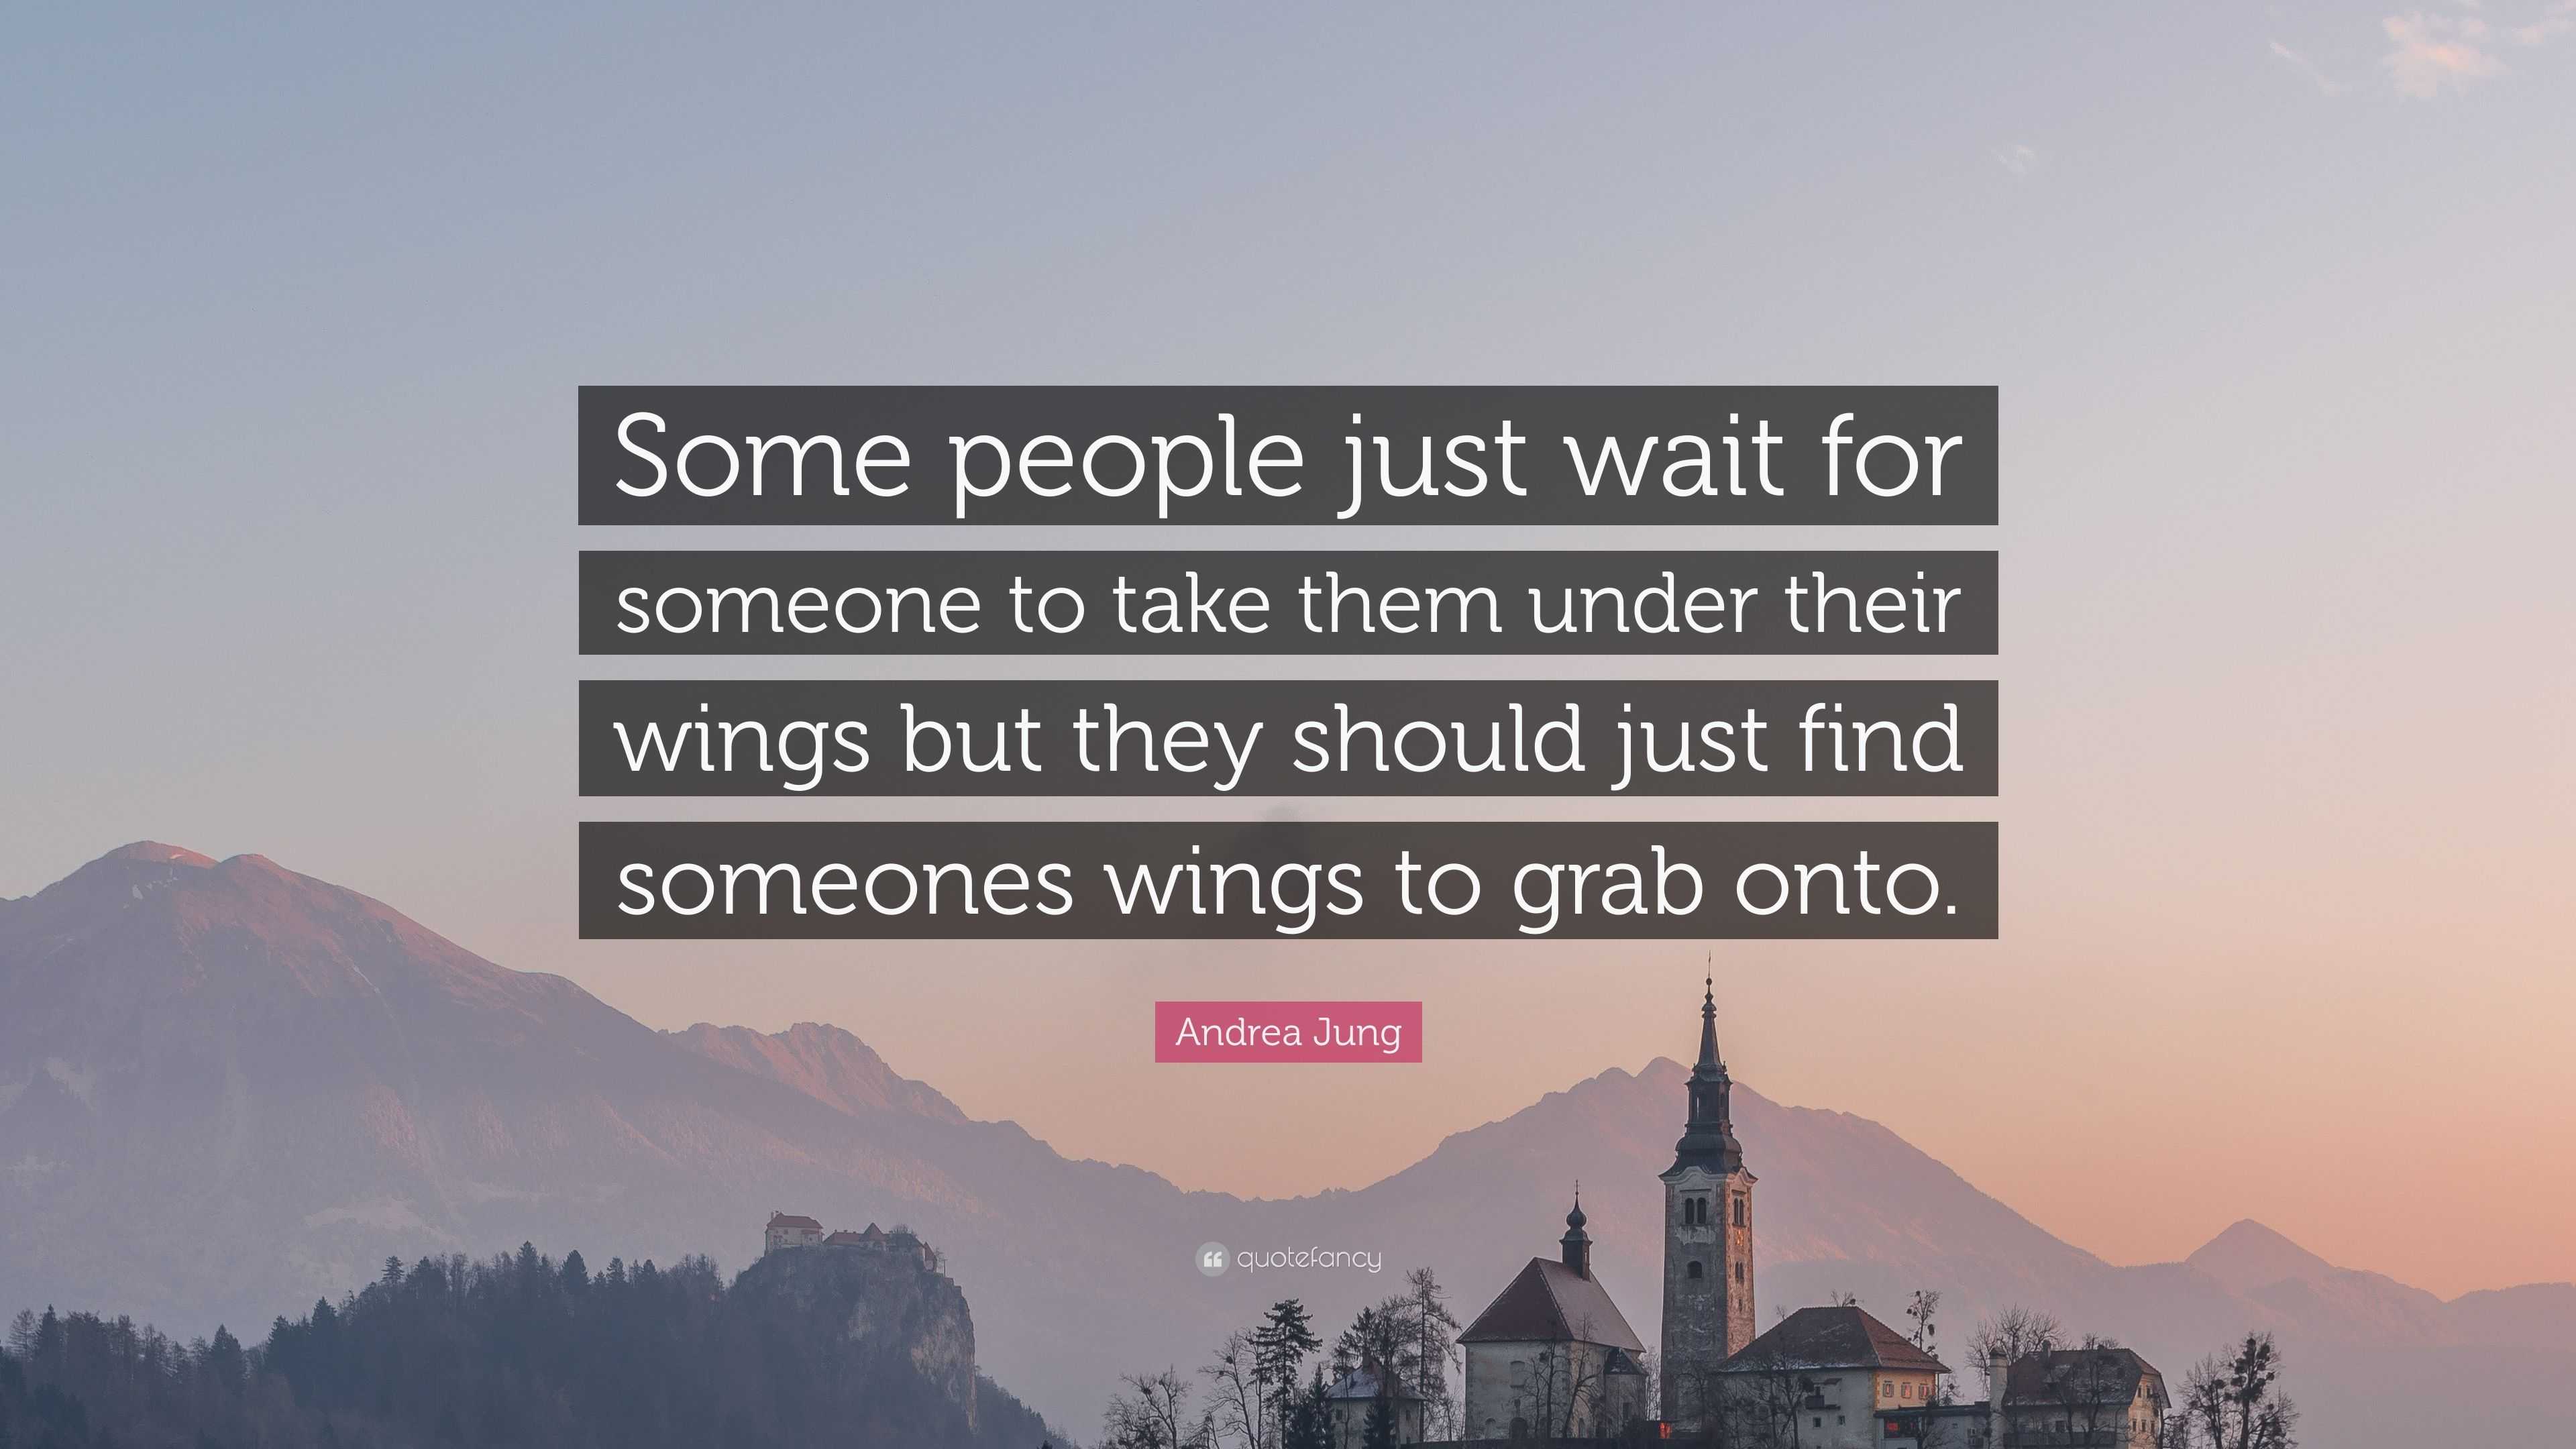 Andrea Jung Quote: “Some people just wait for someone to take them under  their wings but